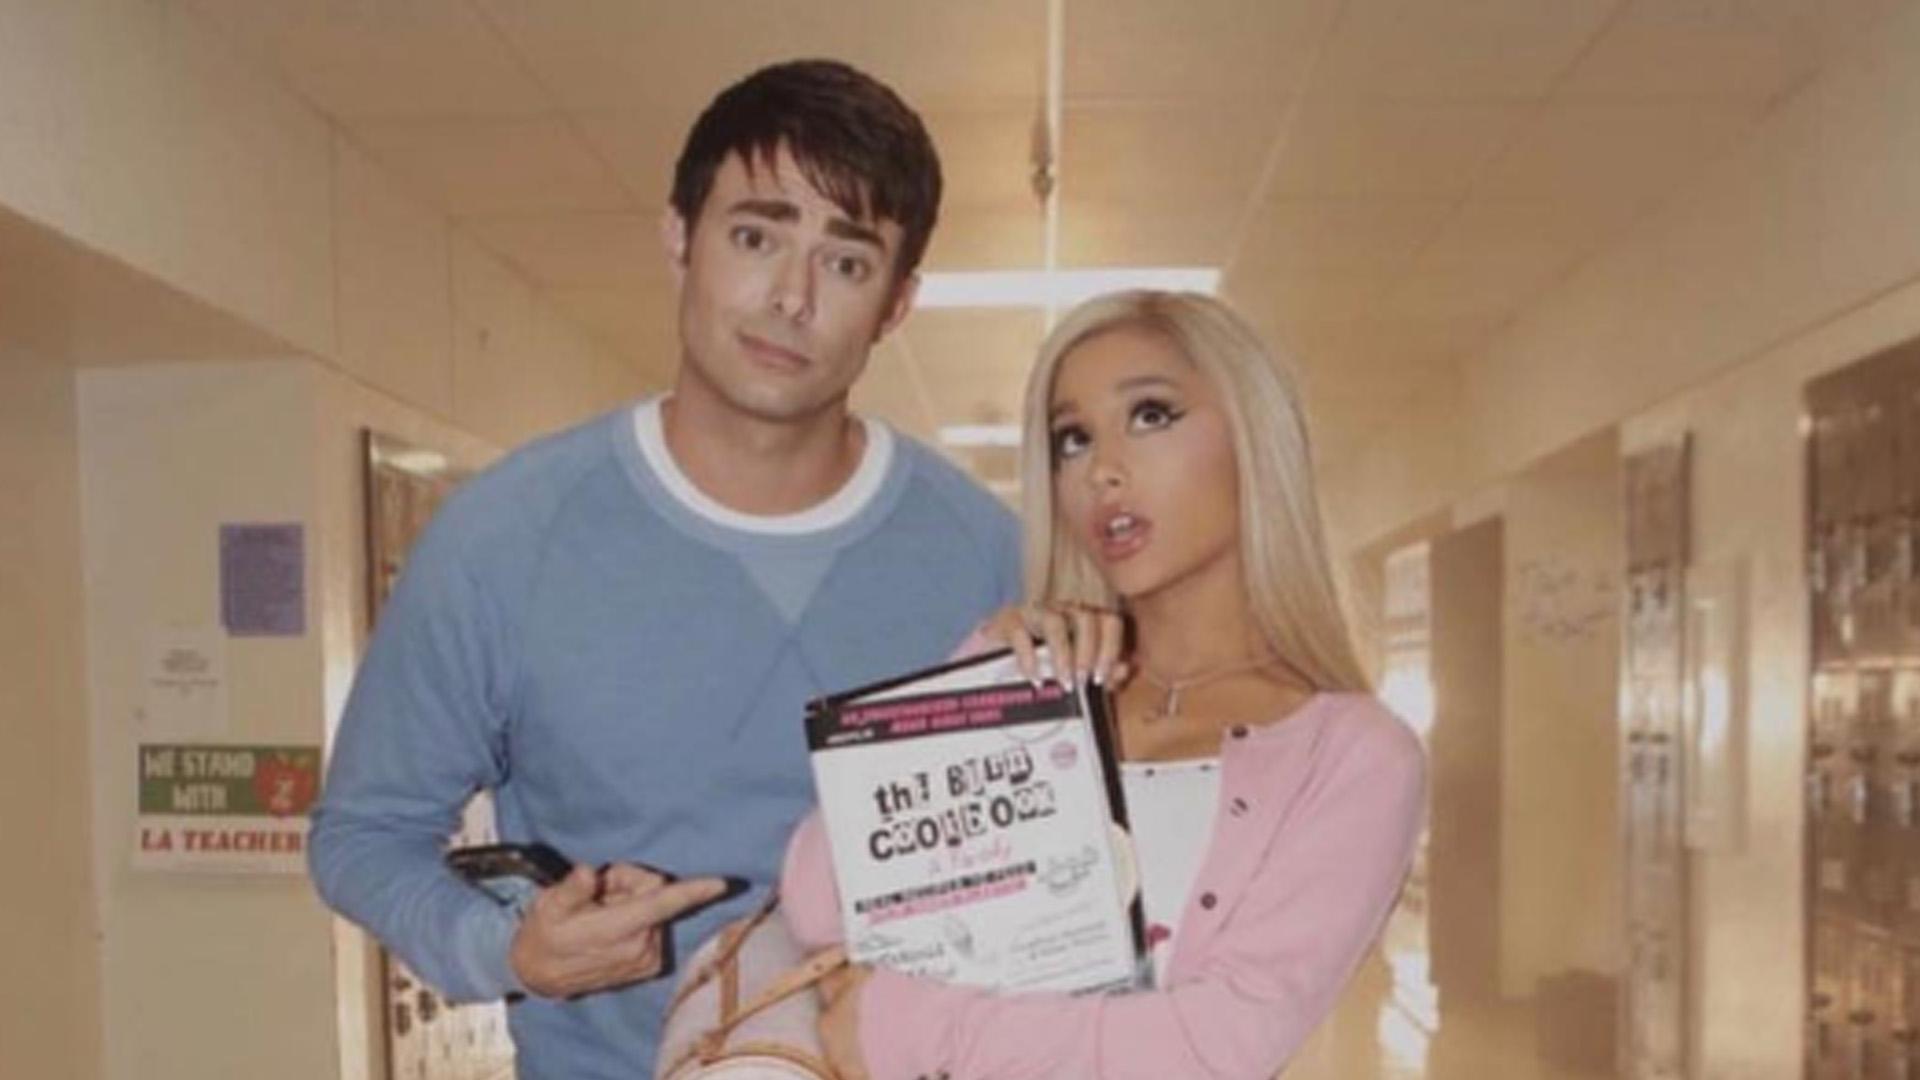 Jonathan Bennett Raves About Working With Ariana Grande In 'Thank U